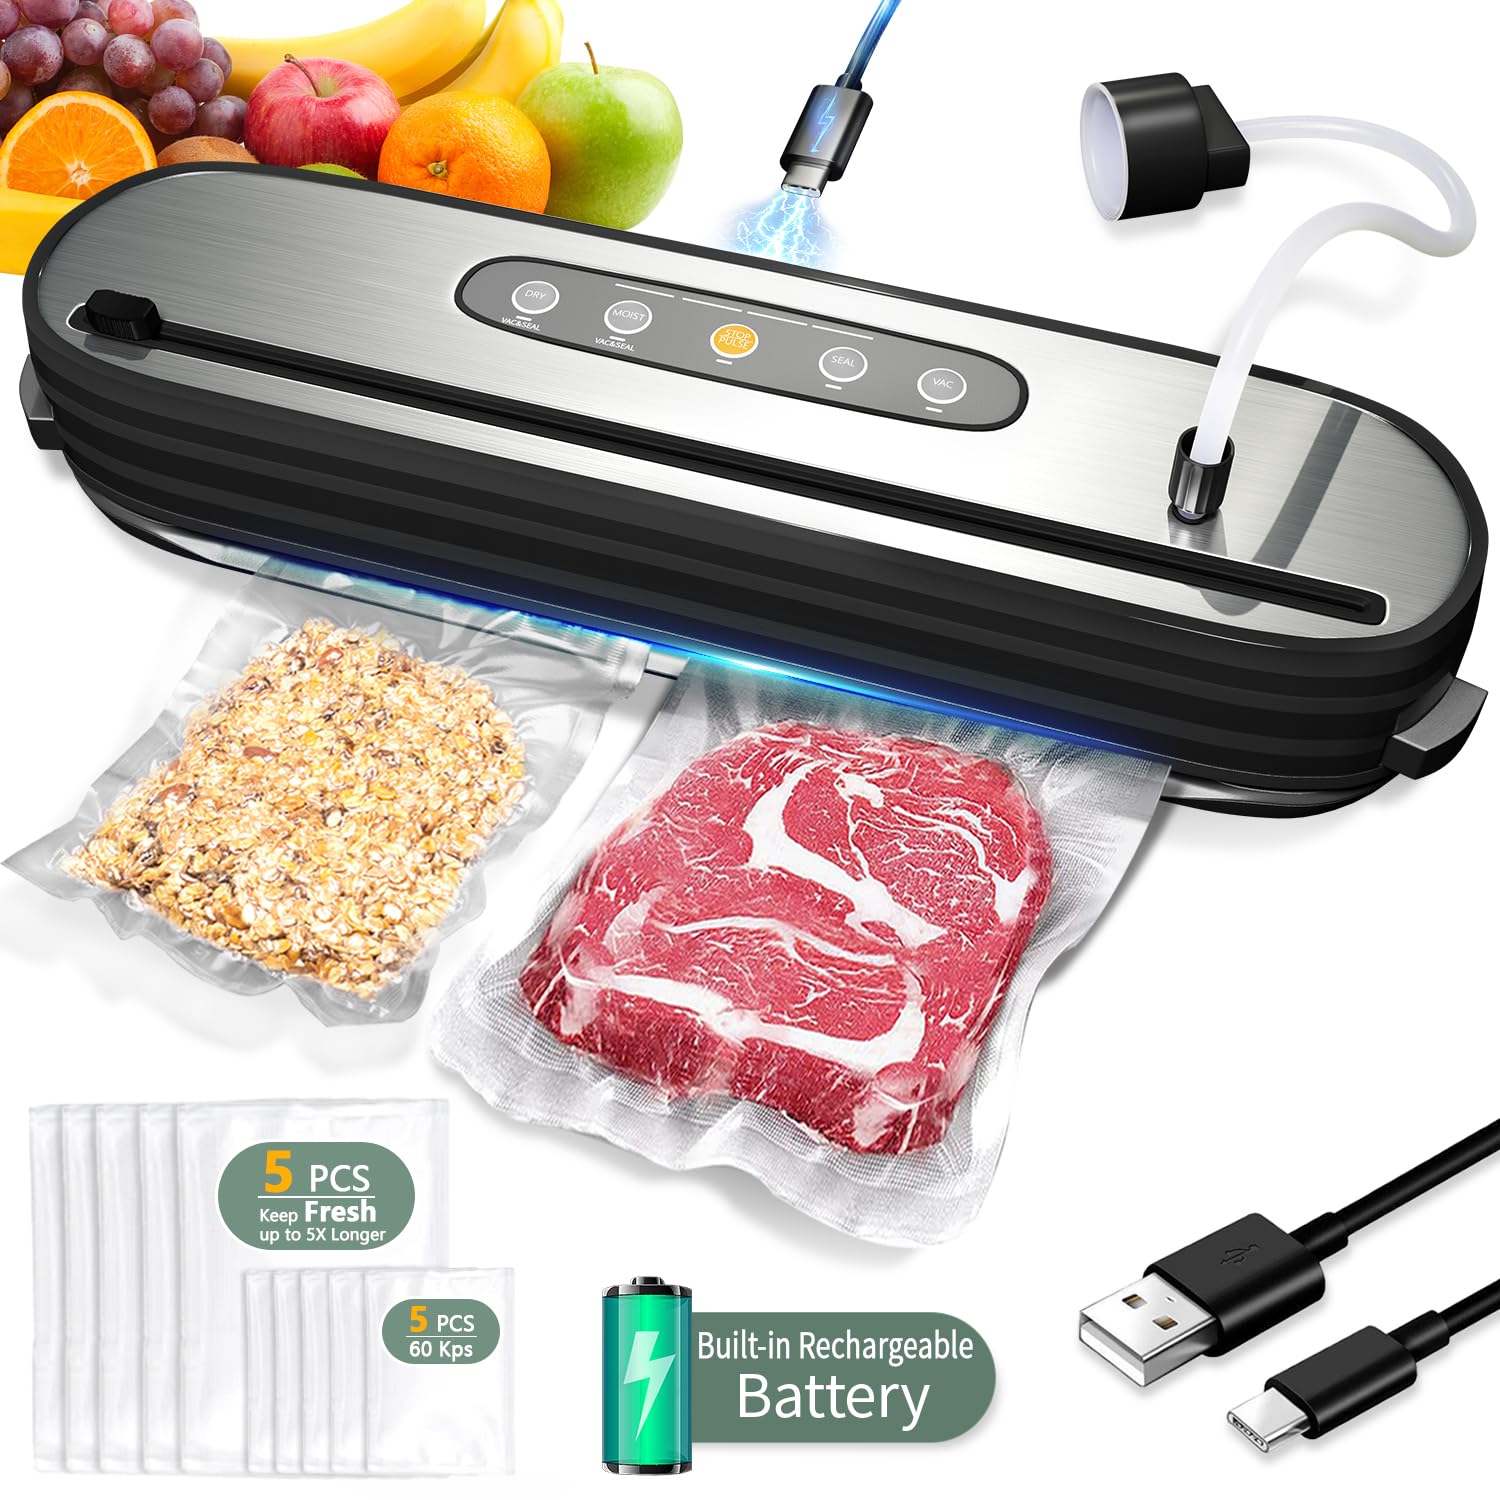 Food Vacuum Sealer Machine, Rechargeable Vacuum Sealer for Food, Portable & Airtight with 10 Vacuum Seal Bags Built-in Cutter, for Sous Vide Food Storage Jars for Kitchen Camping Fishing Picnic